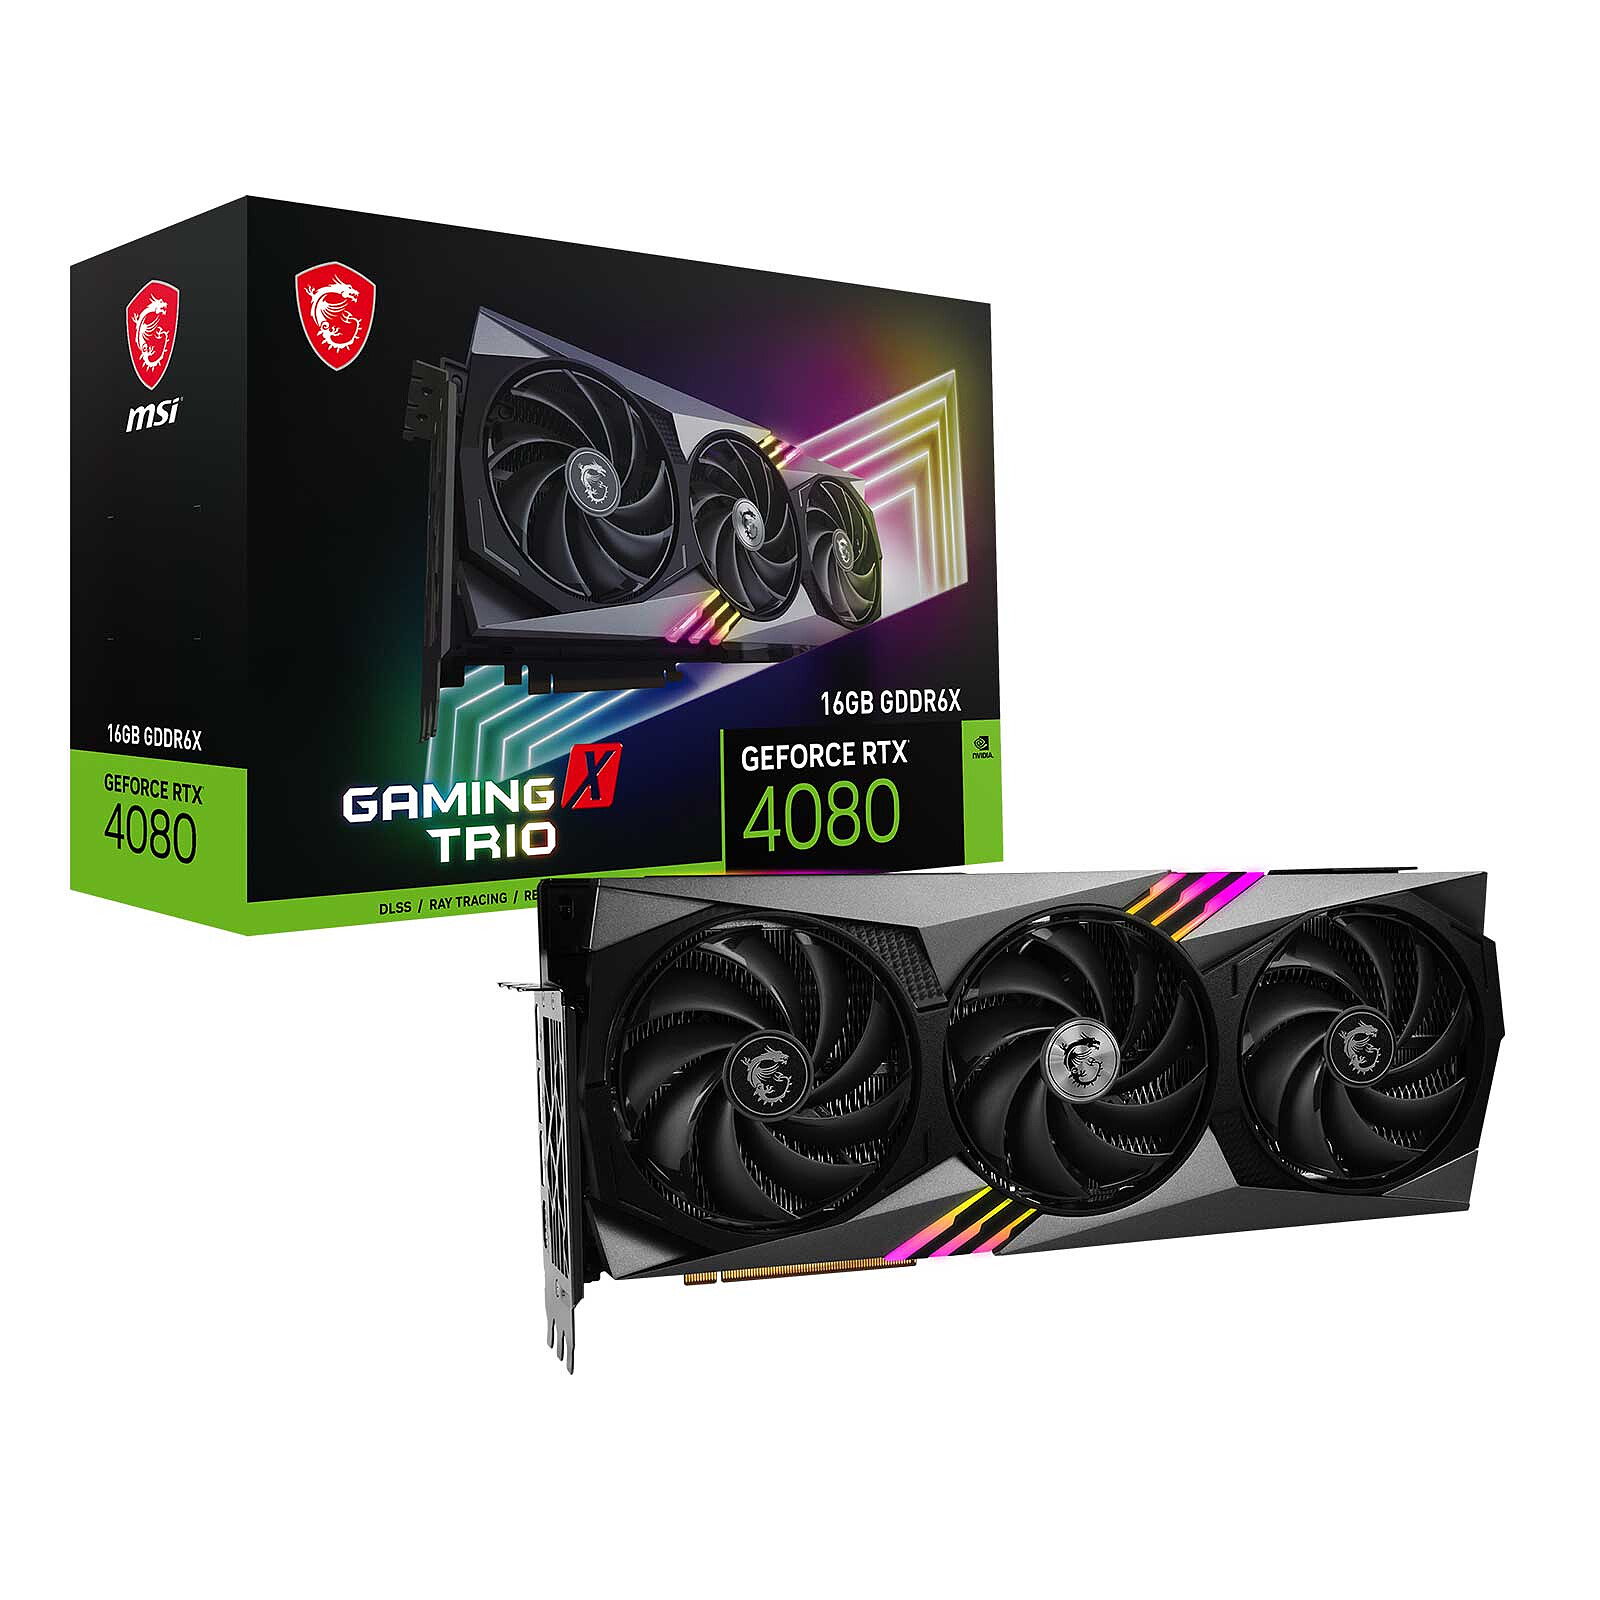 GIGABYTE Launches GeForce RTX 4080 Series graphics cards